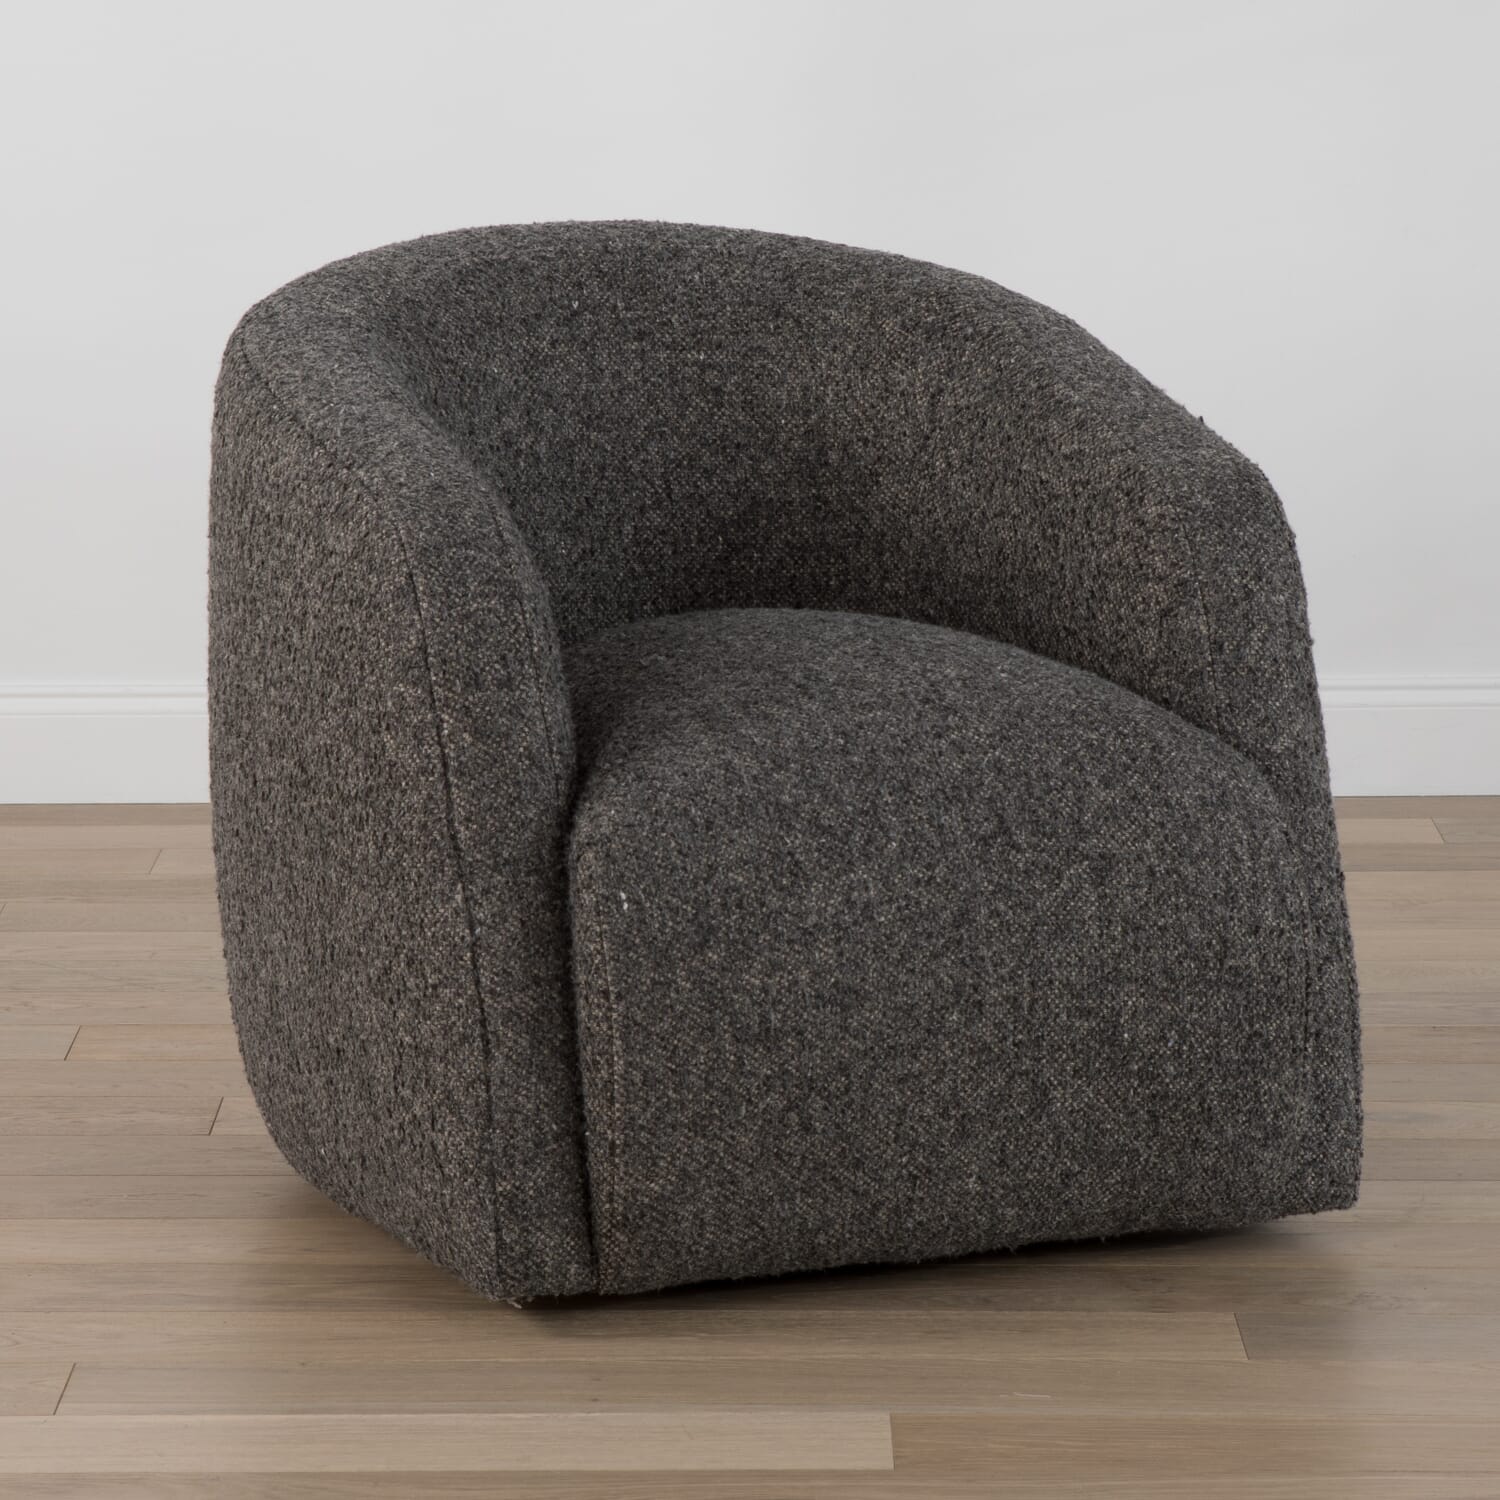 swivel club chairs for living room